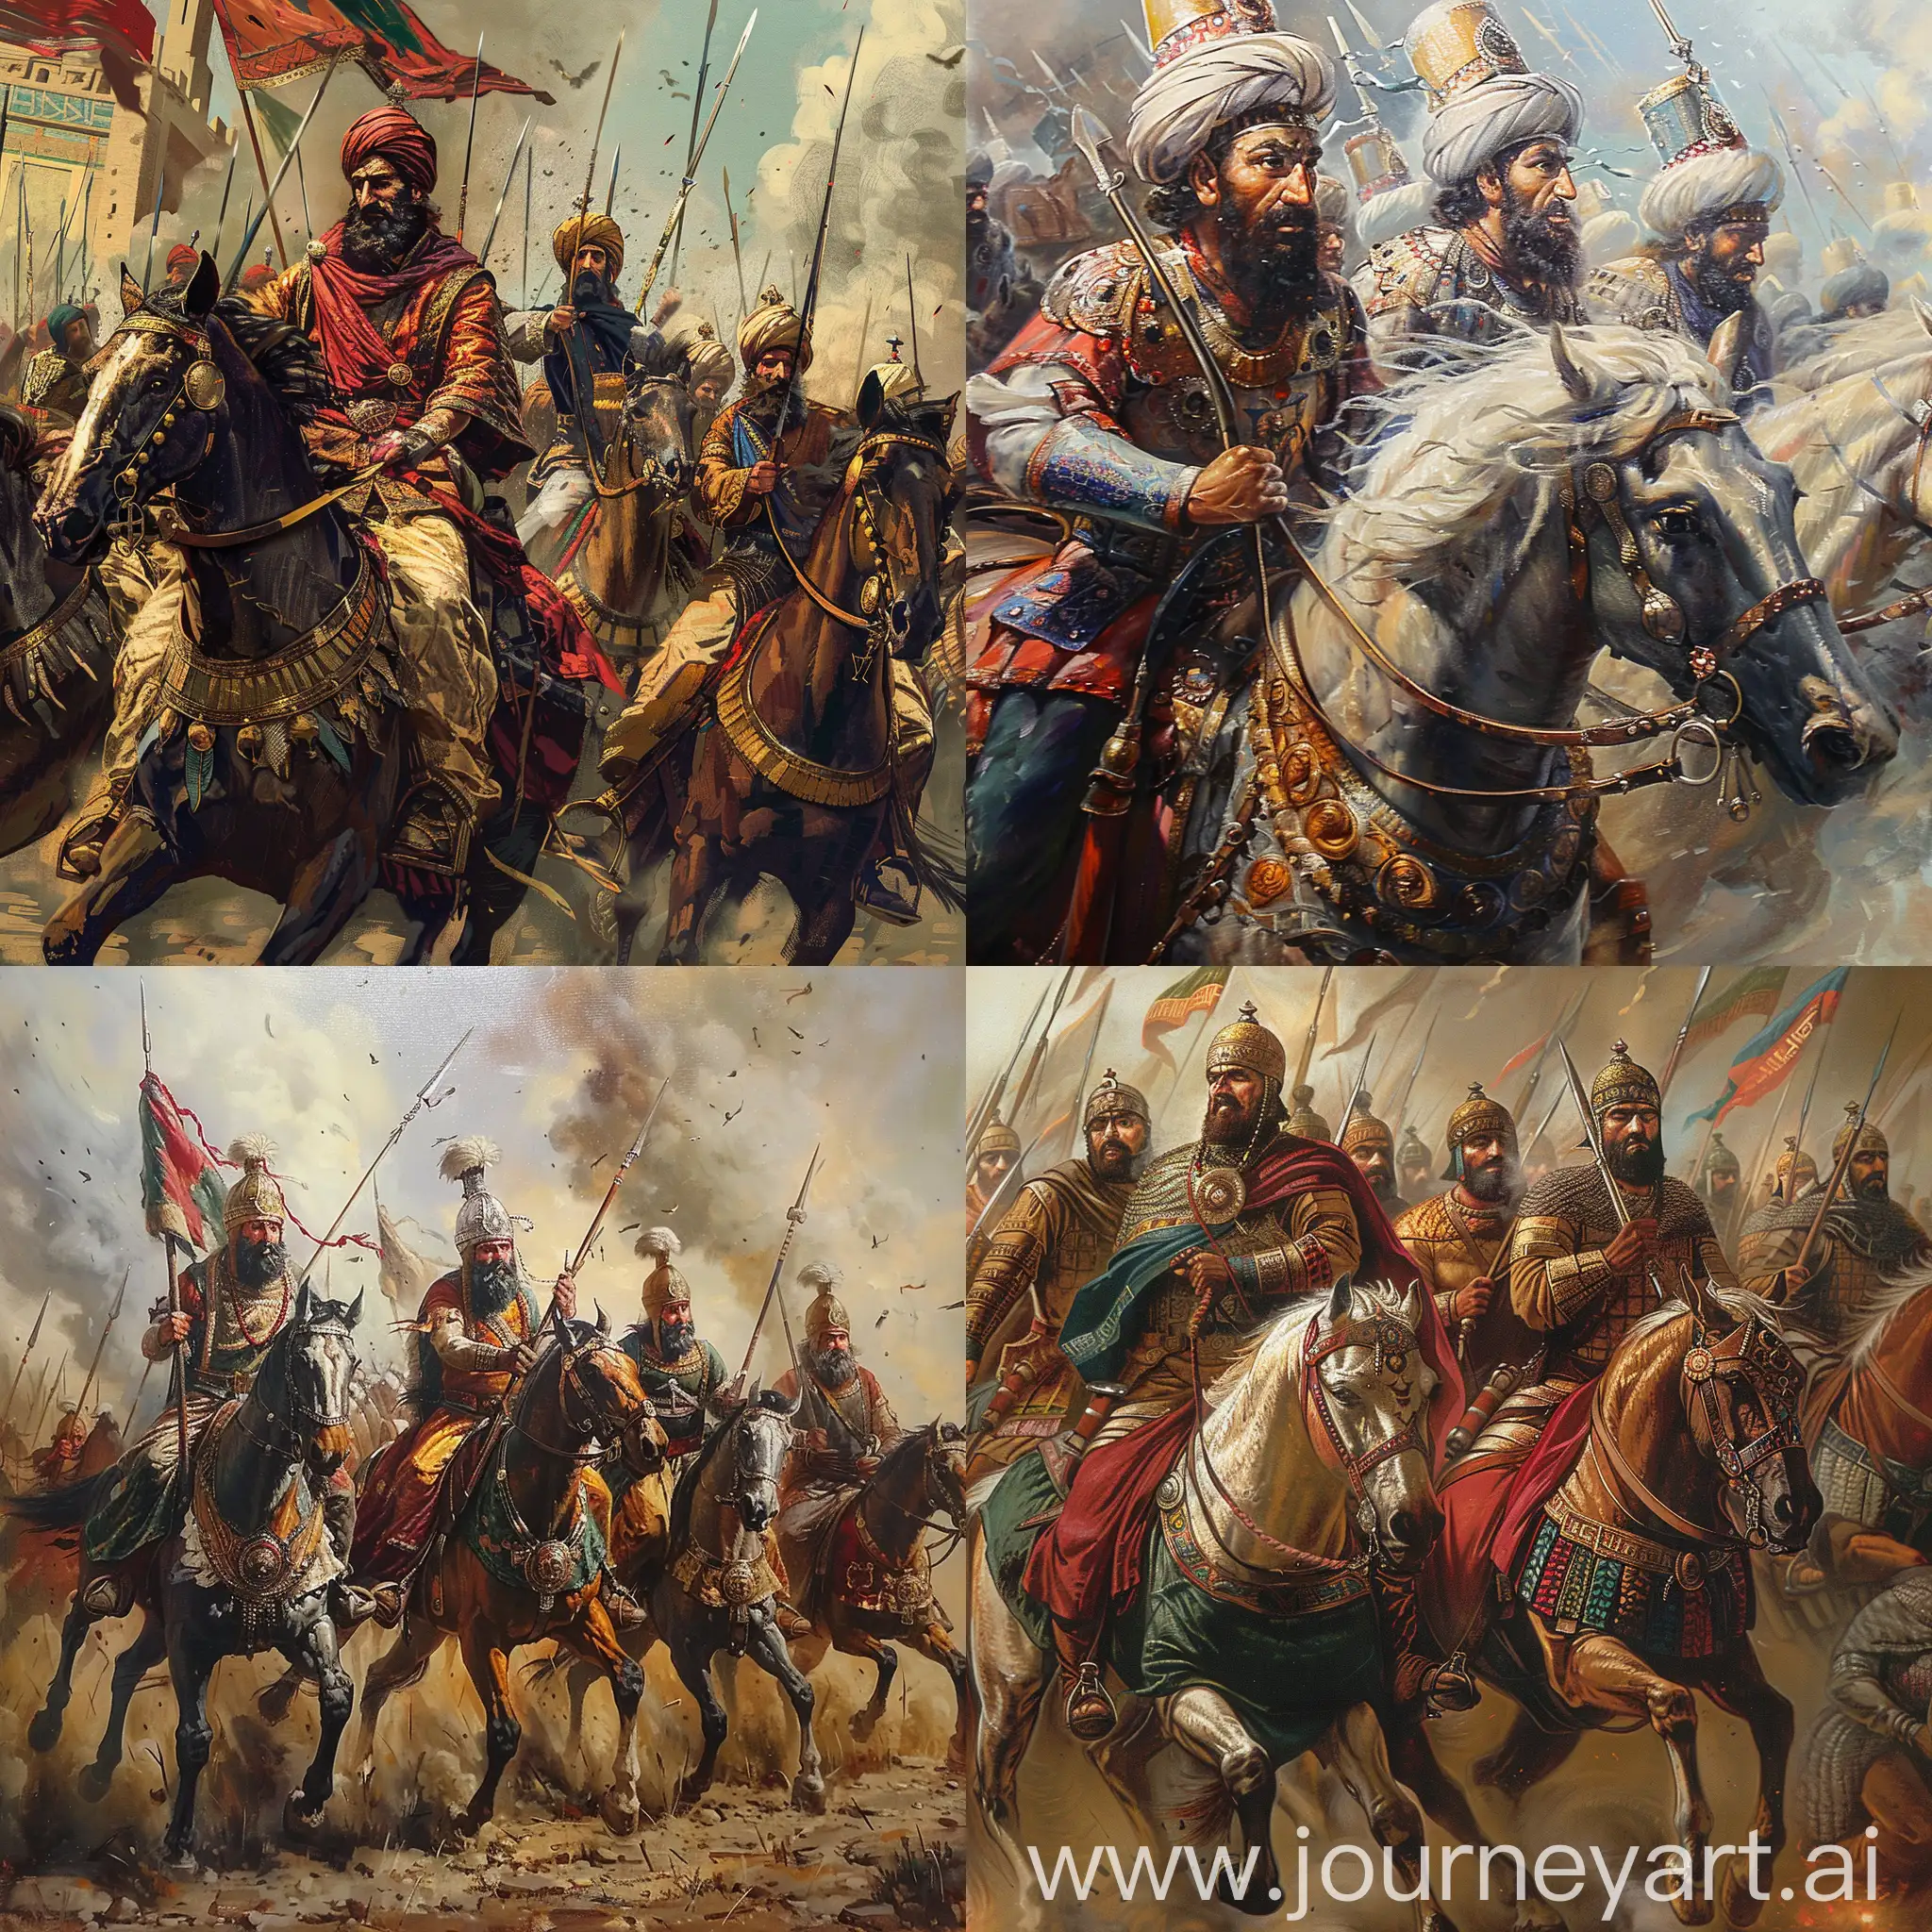 Cavalry soldiers of the Sassanian army of ancient Iran, at war, epic, detailed details, ancient Iranian culture